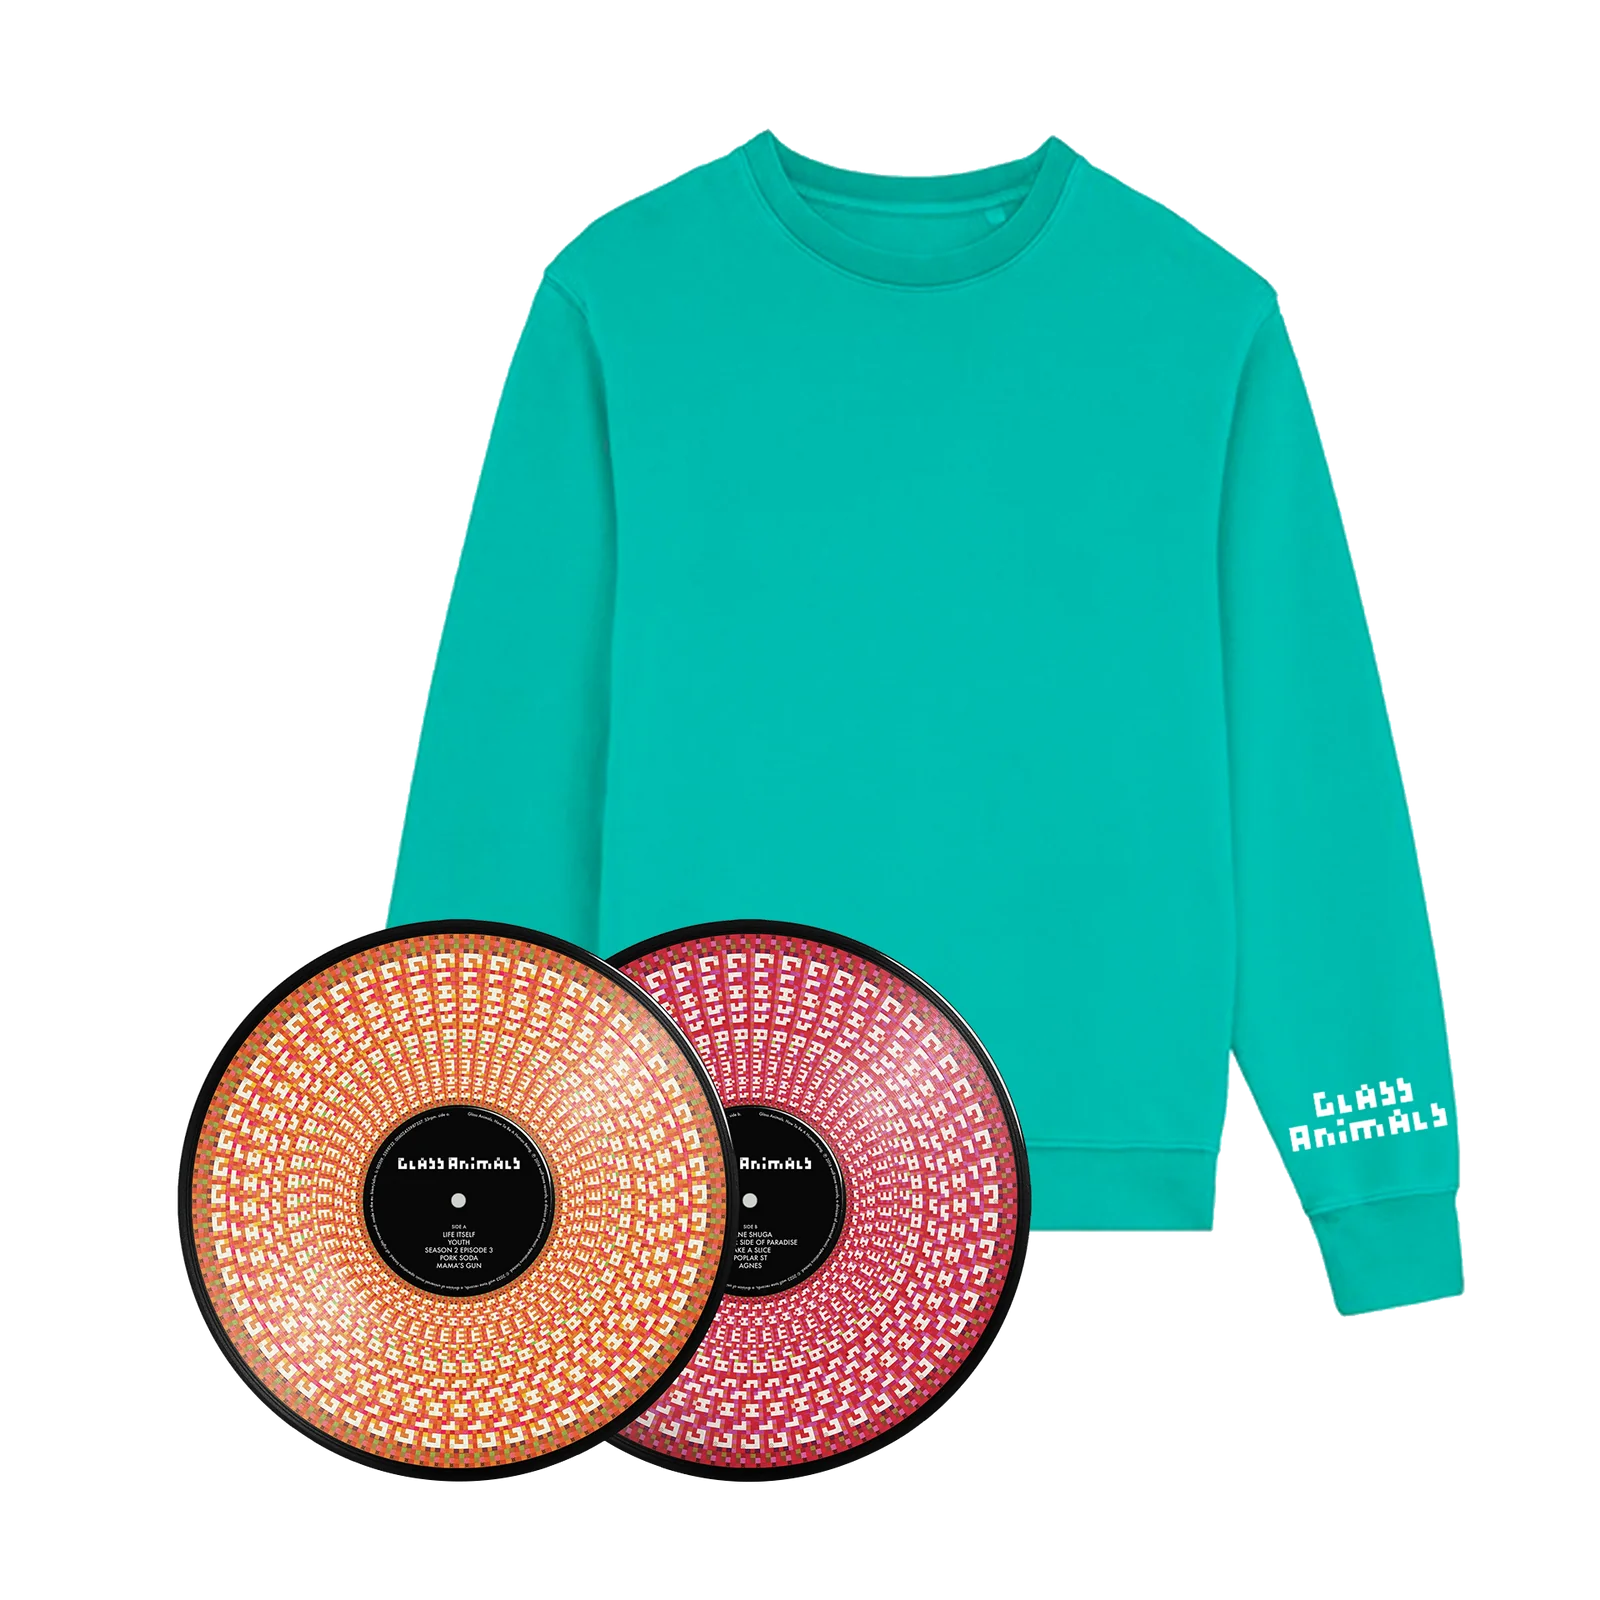 How To Be A Human Being: Zoetrope Vinyl LP + Sweatshirt